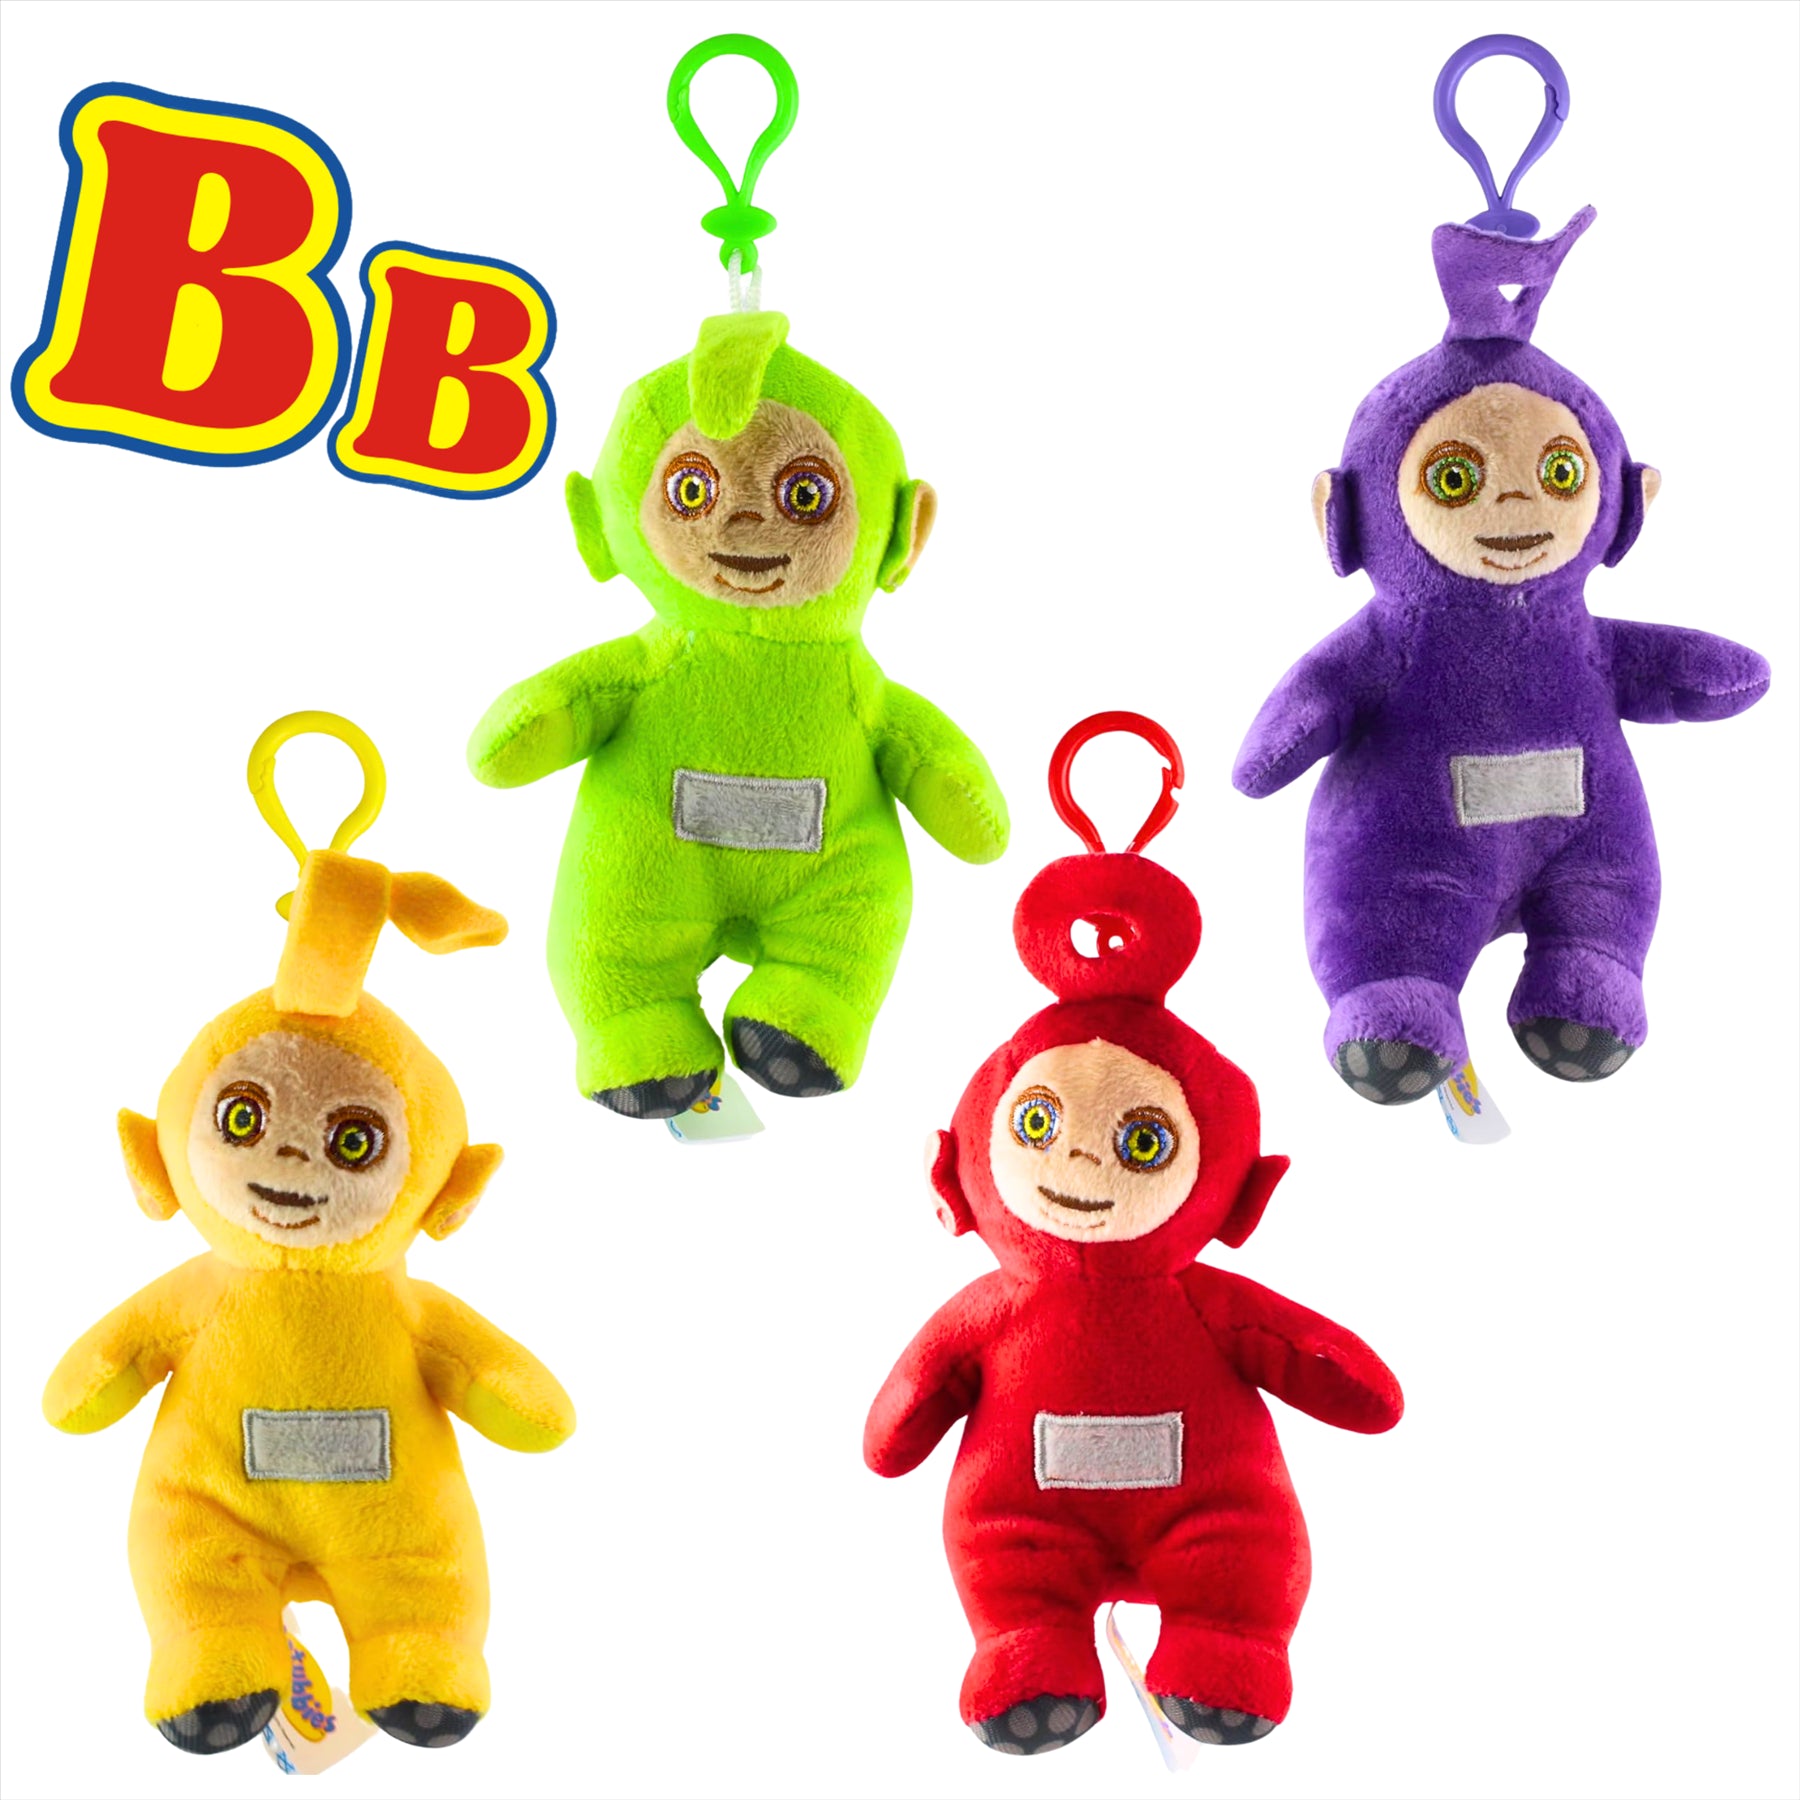 Teletubbies Super Soft Gift Quality 12cm Embroidered Plush Keyclips Set of All 4 - Tinky Winky, Dipsy, Laa-Laa, and Po